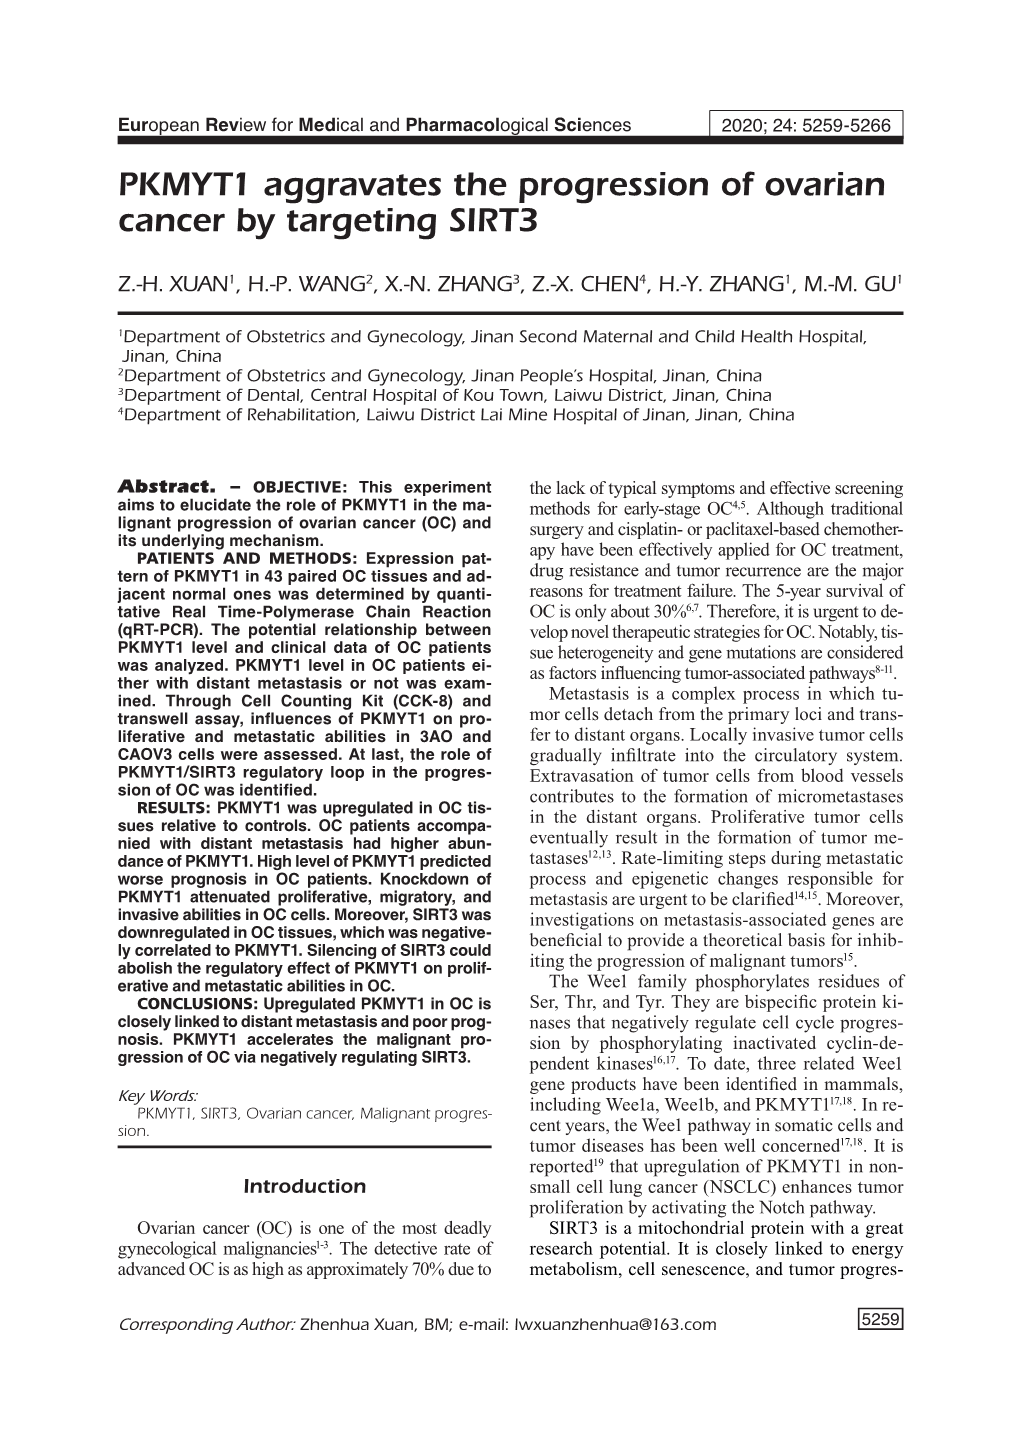 PKMYT1 Aggravates the Progression of Ovarian Cancer by Targeting SIRT3